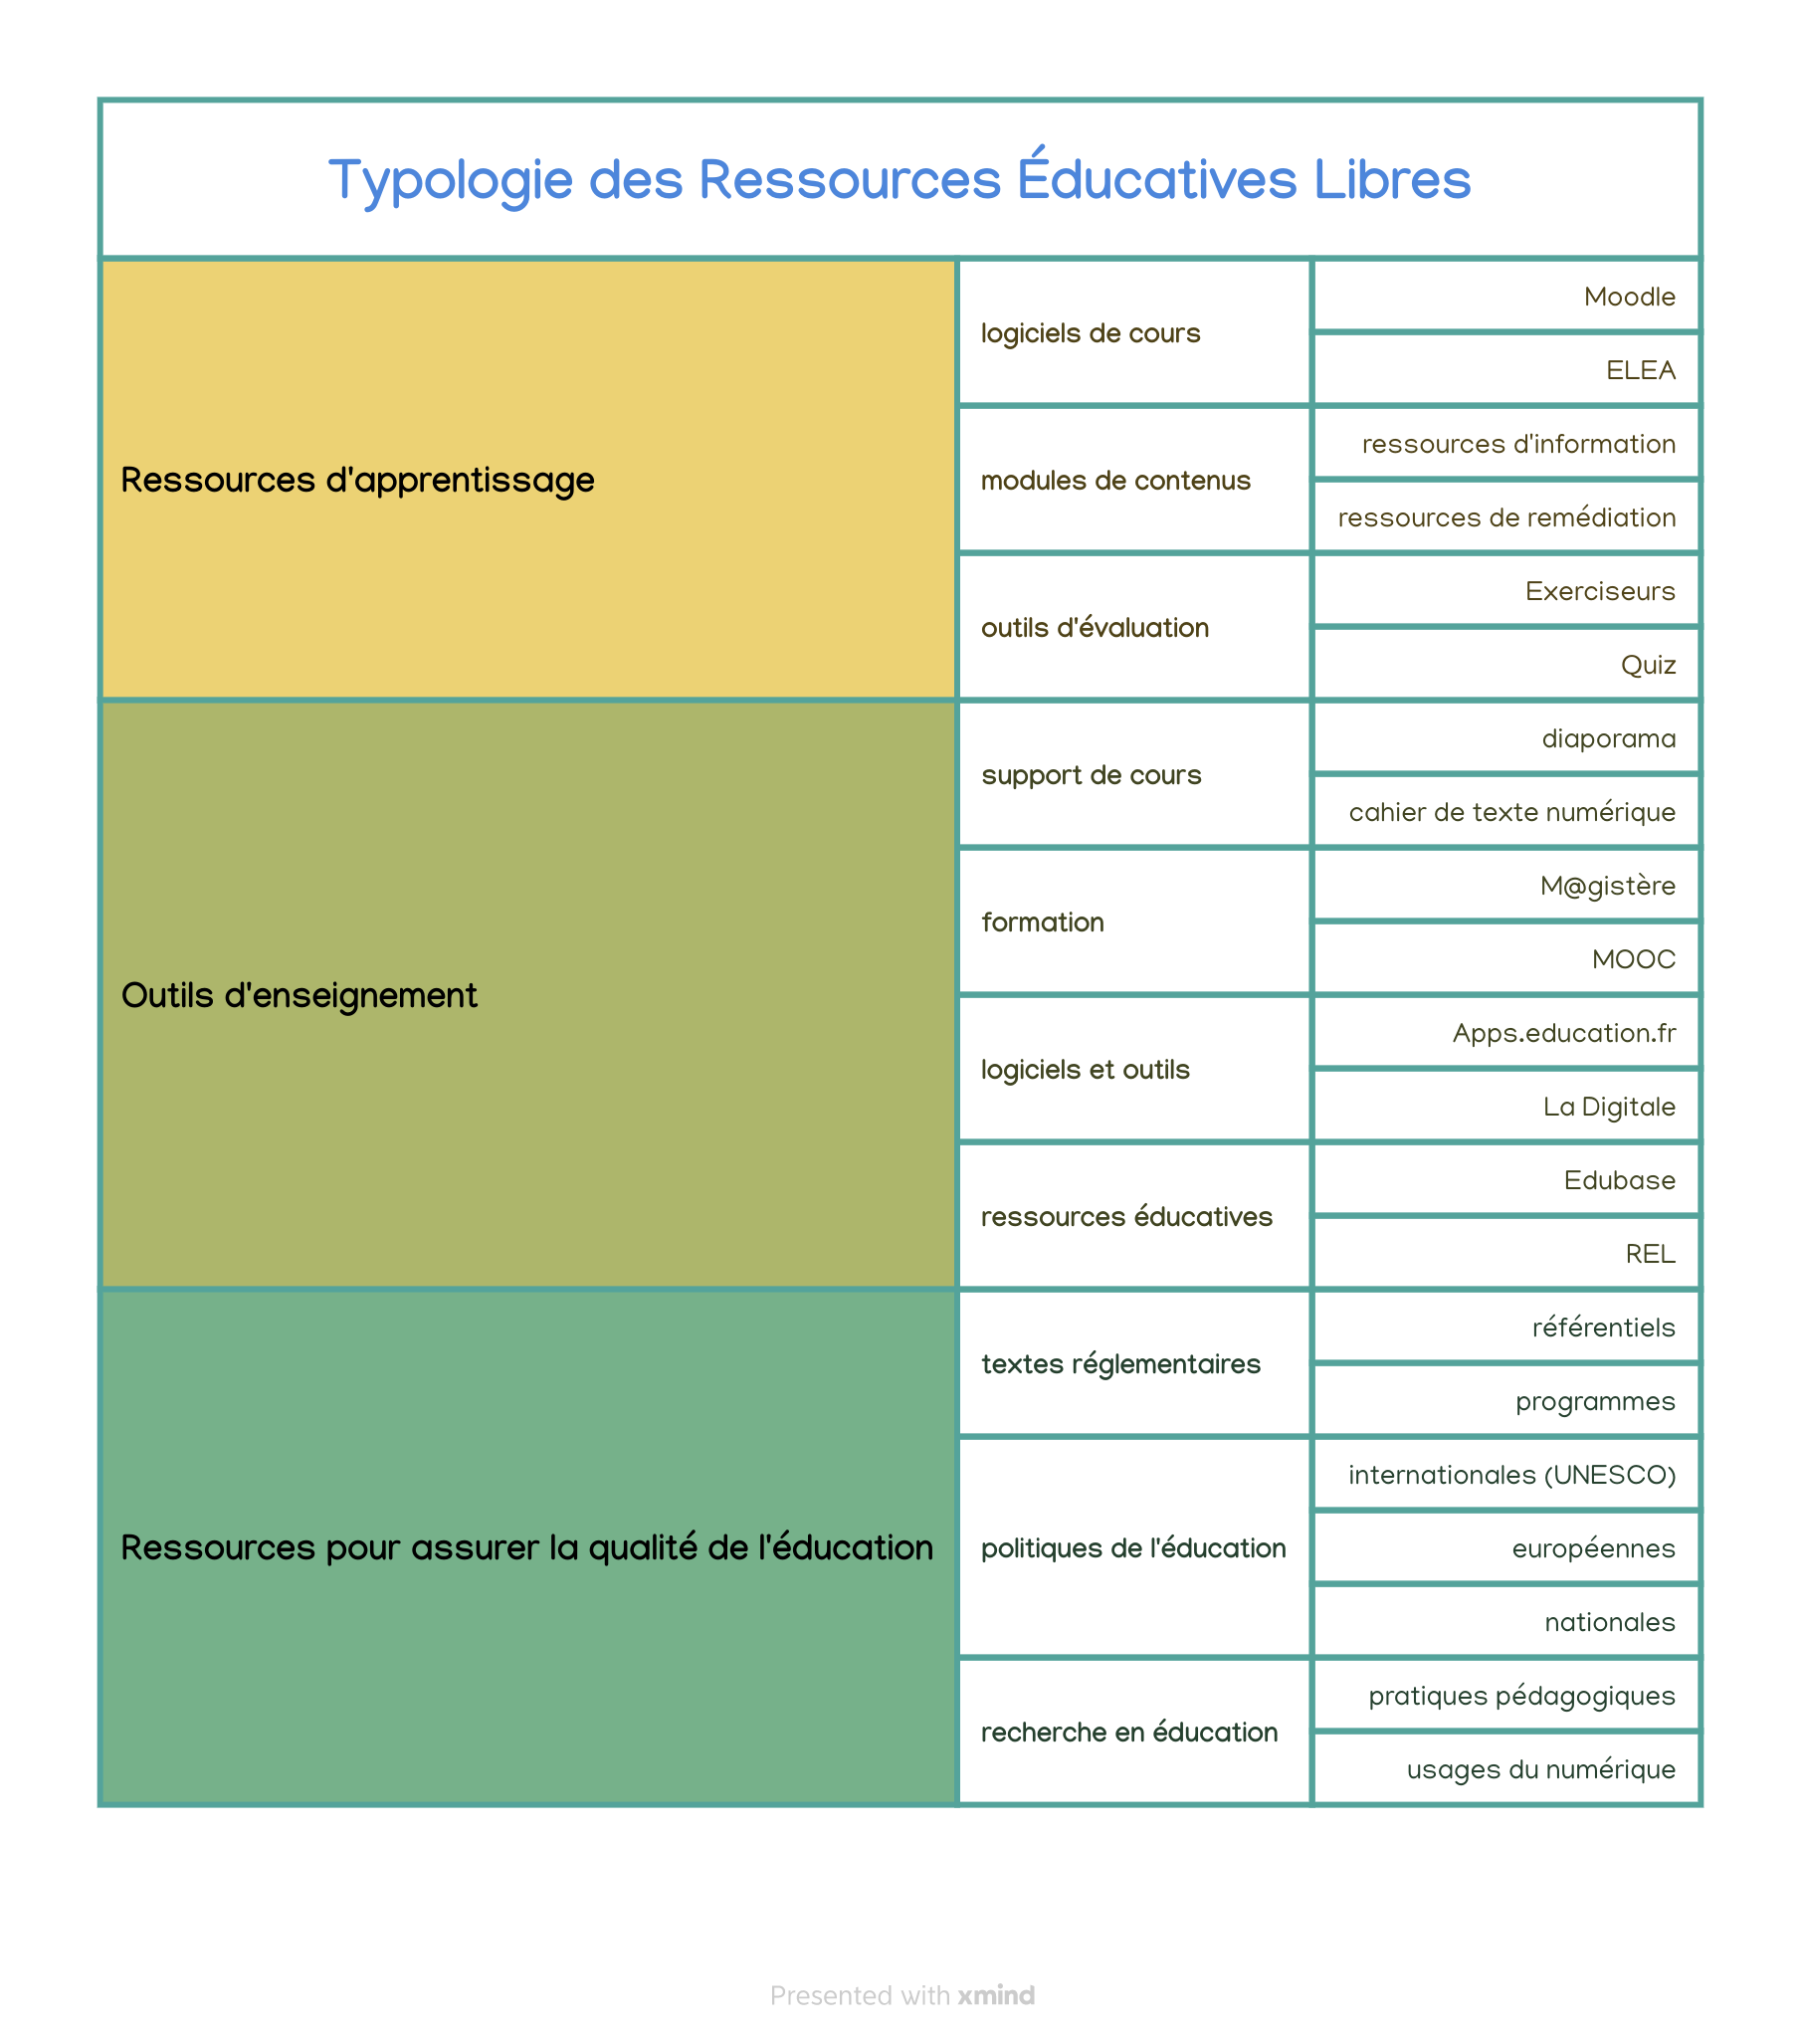 Typologie-REL.png